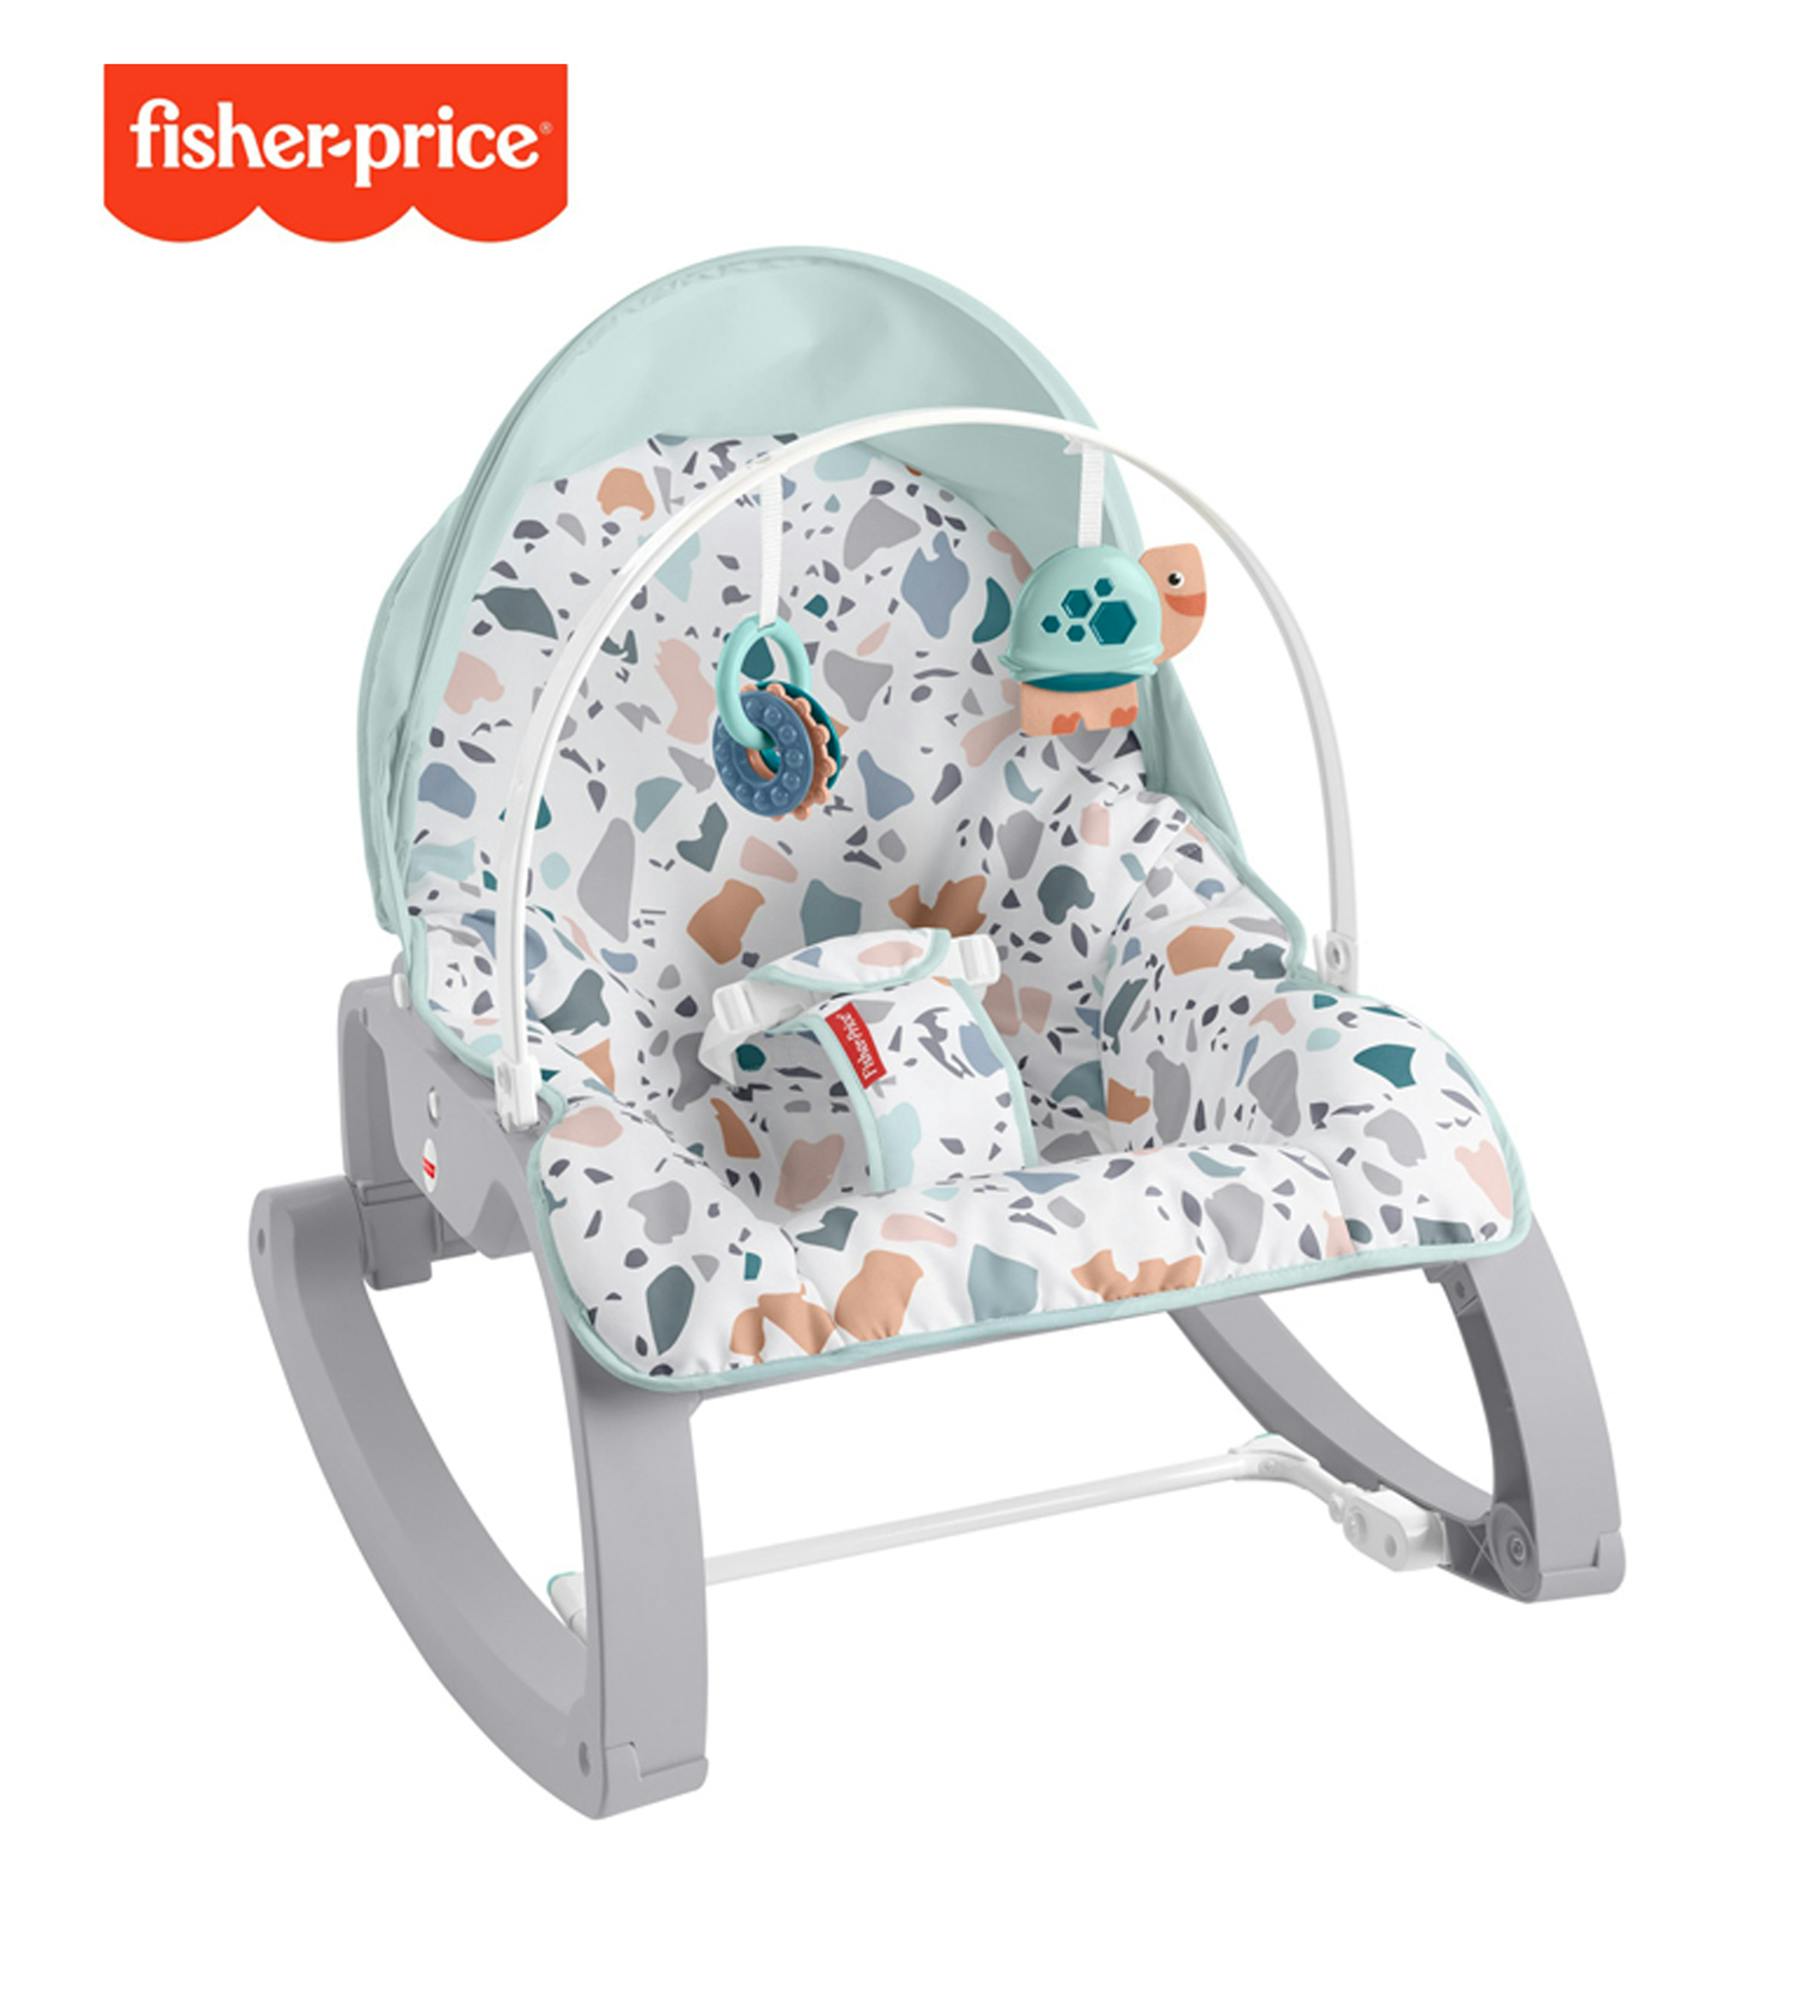 Fisher-Price Deluxe Infant-to-Toddler Rocker